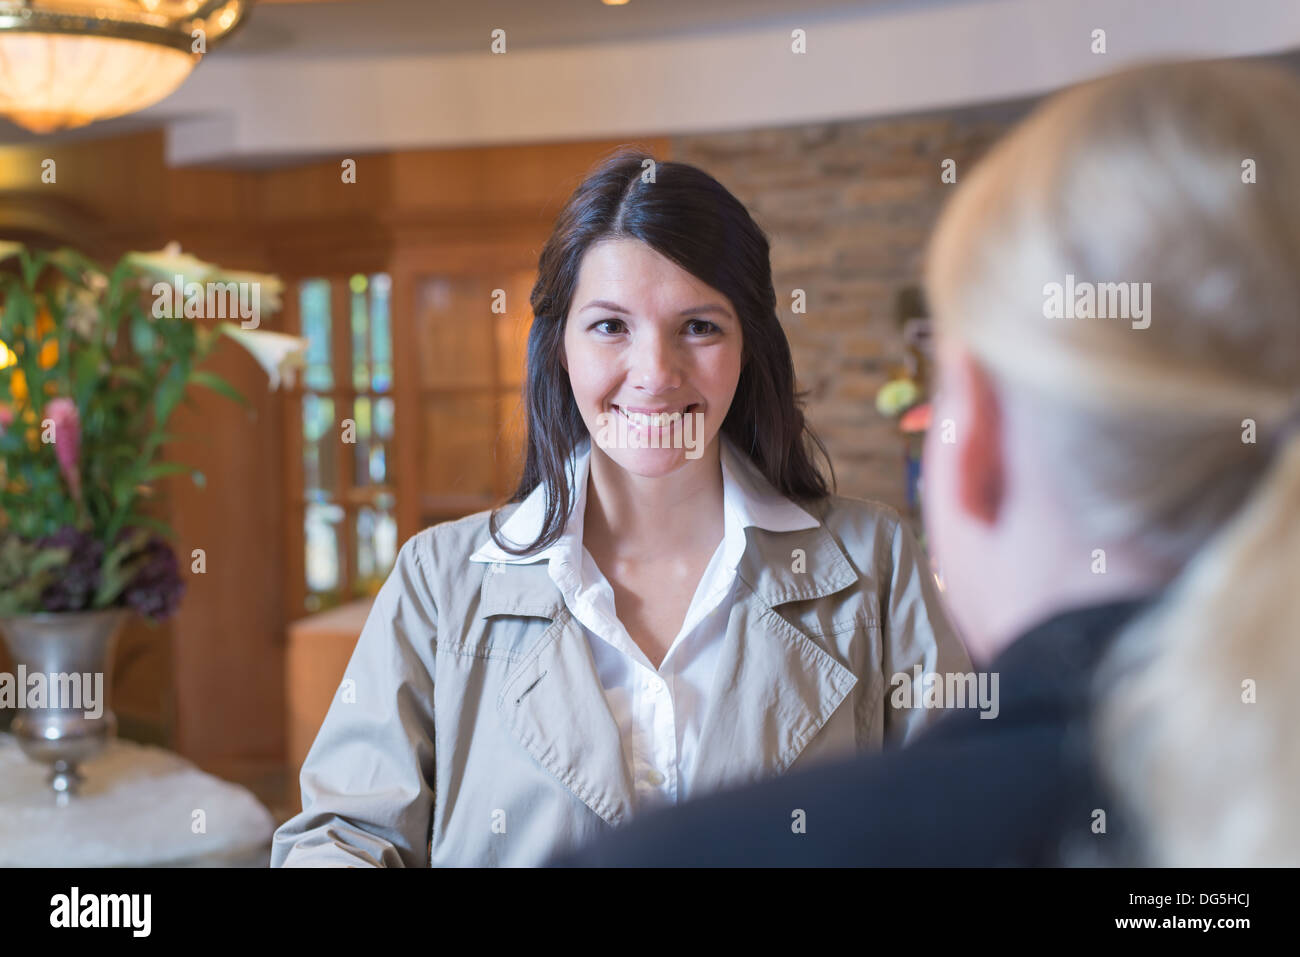 young woman at hotel reception Stock Photo